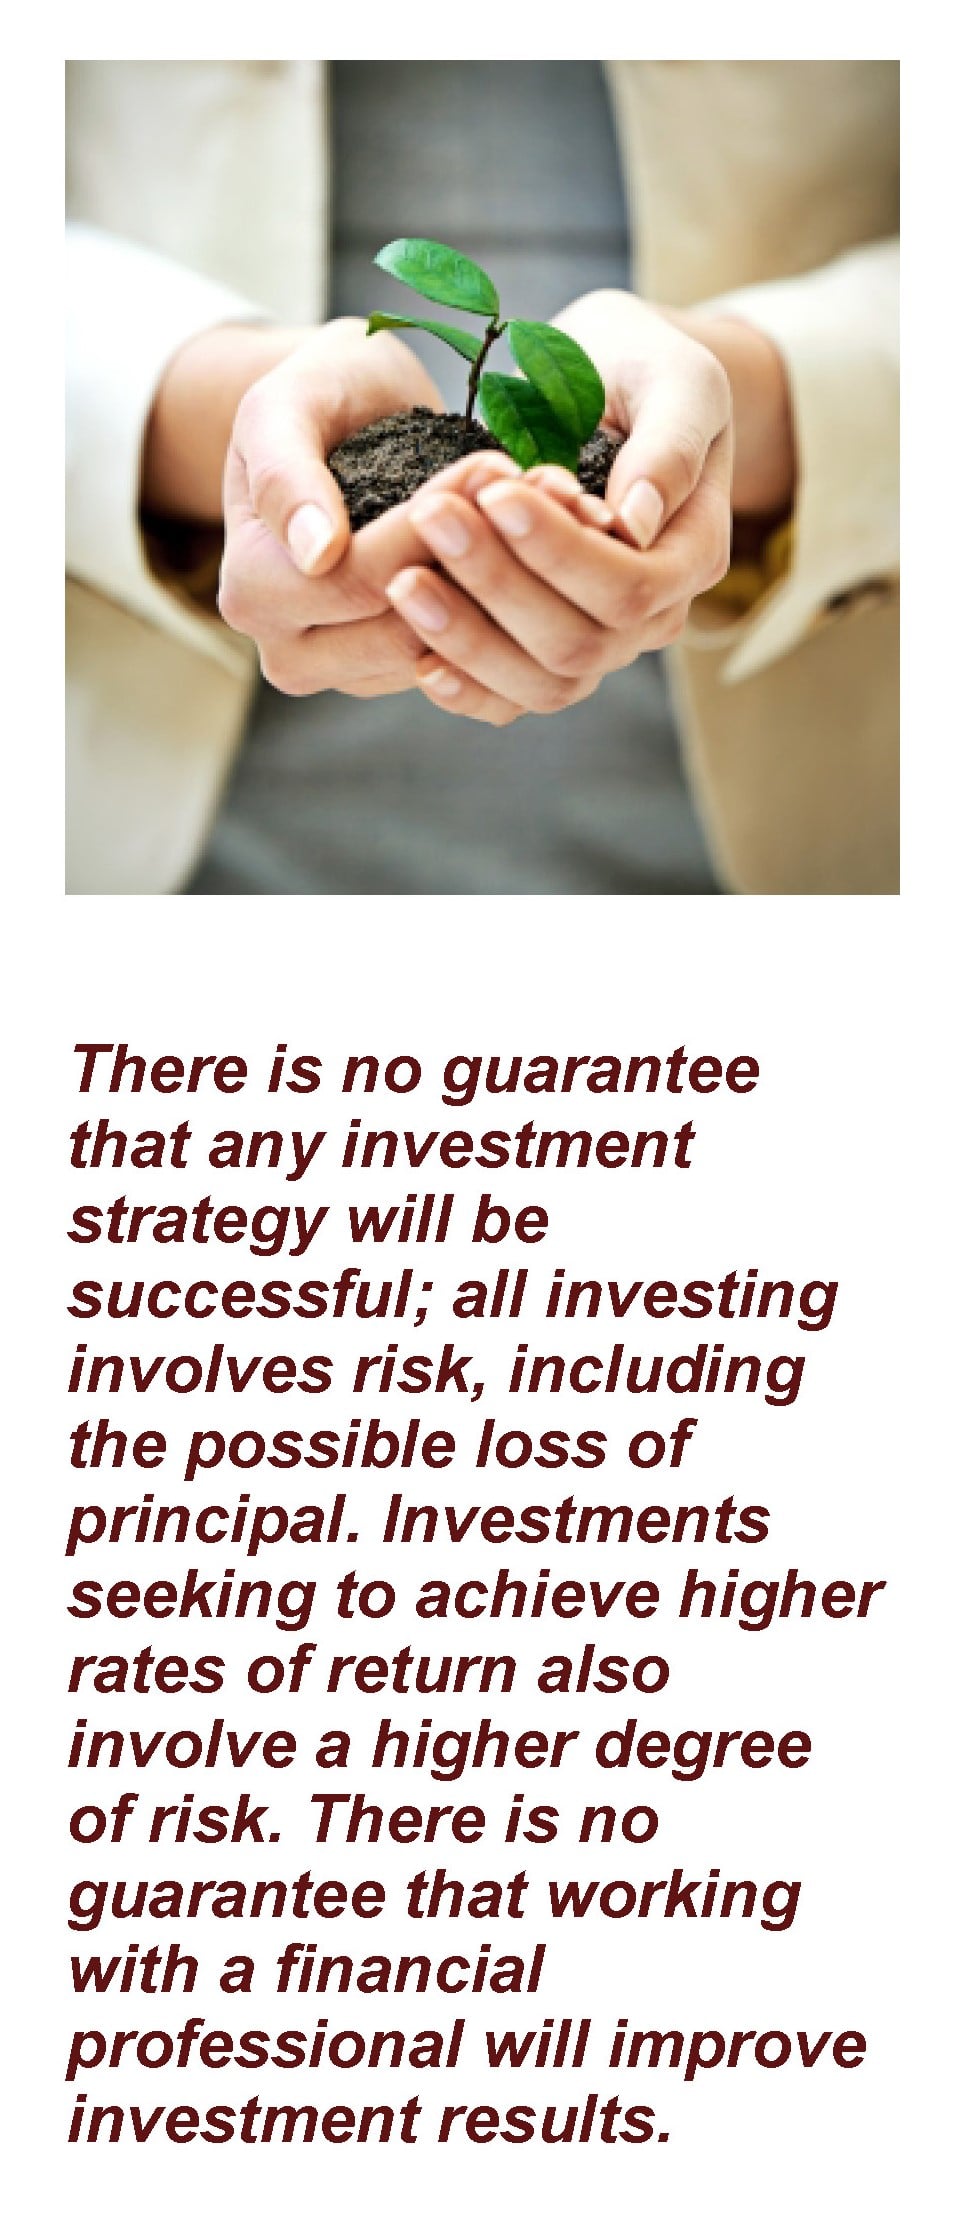 Person holding a plant. Caption text: There is no guarantee that any investment strategy will be successful; all investing involves risk, including the possible loss of principal. Investments seeking to achieve higher rates of return also involve a higher degree of risk. There is no guarantee that working with a financial professional will improve investment results. Article title Growth vs. Value: What's the Difference?